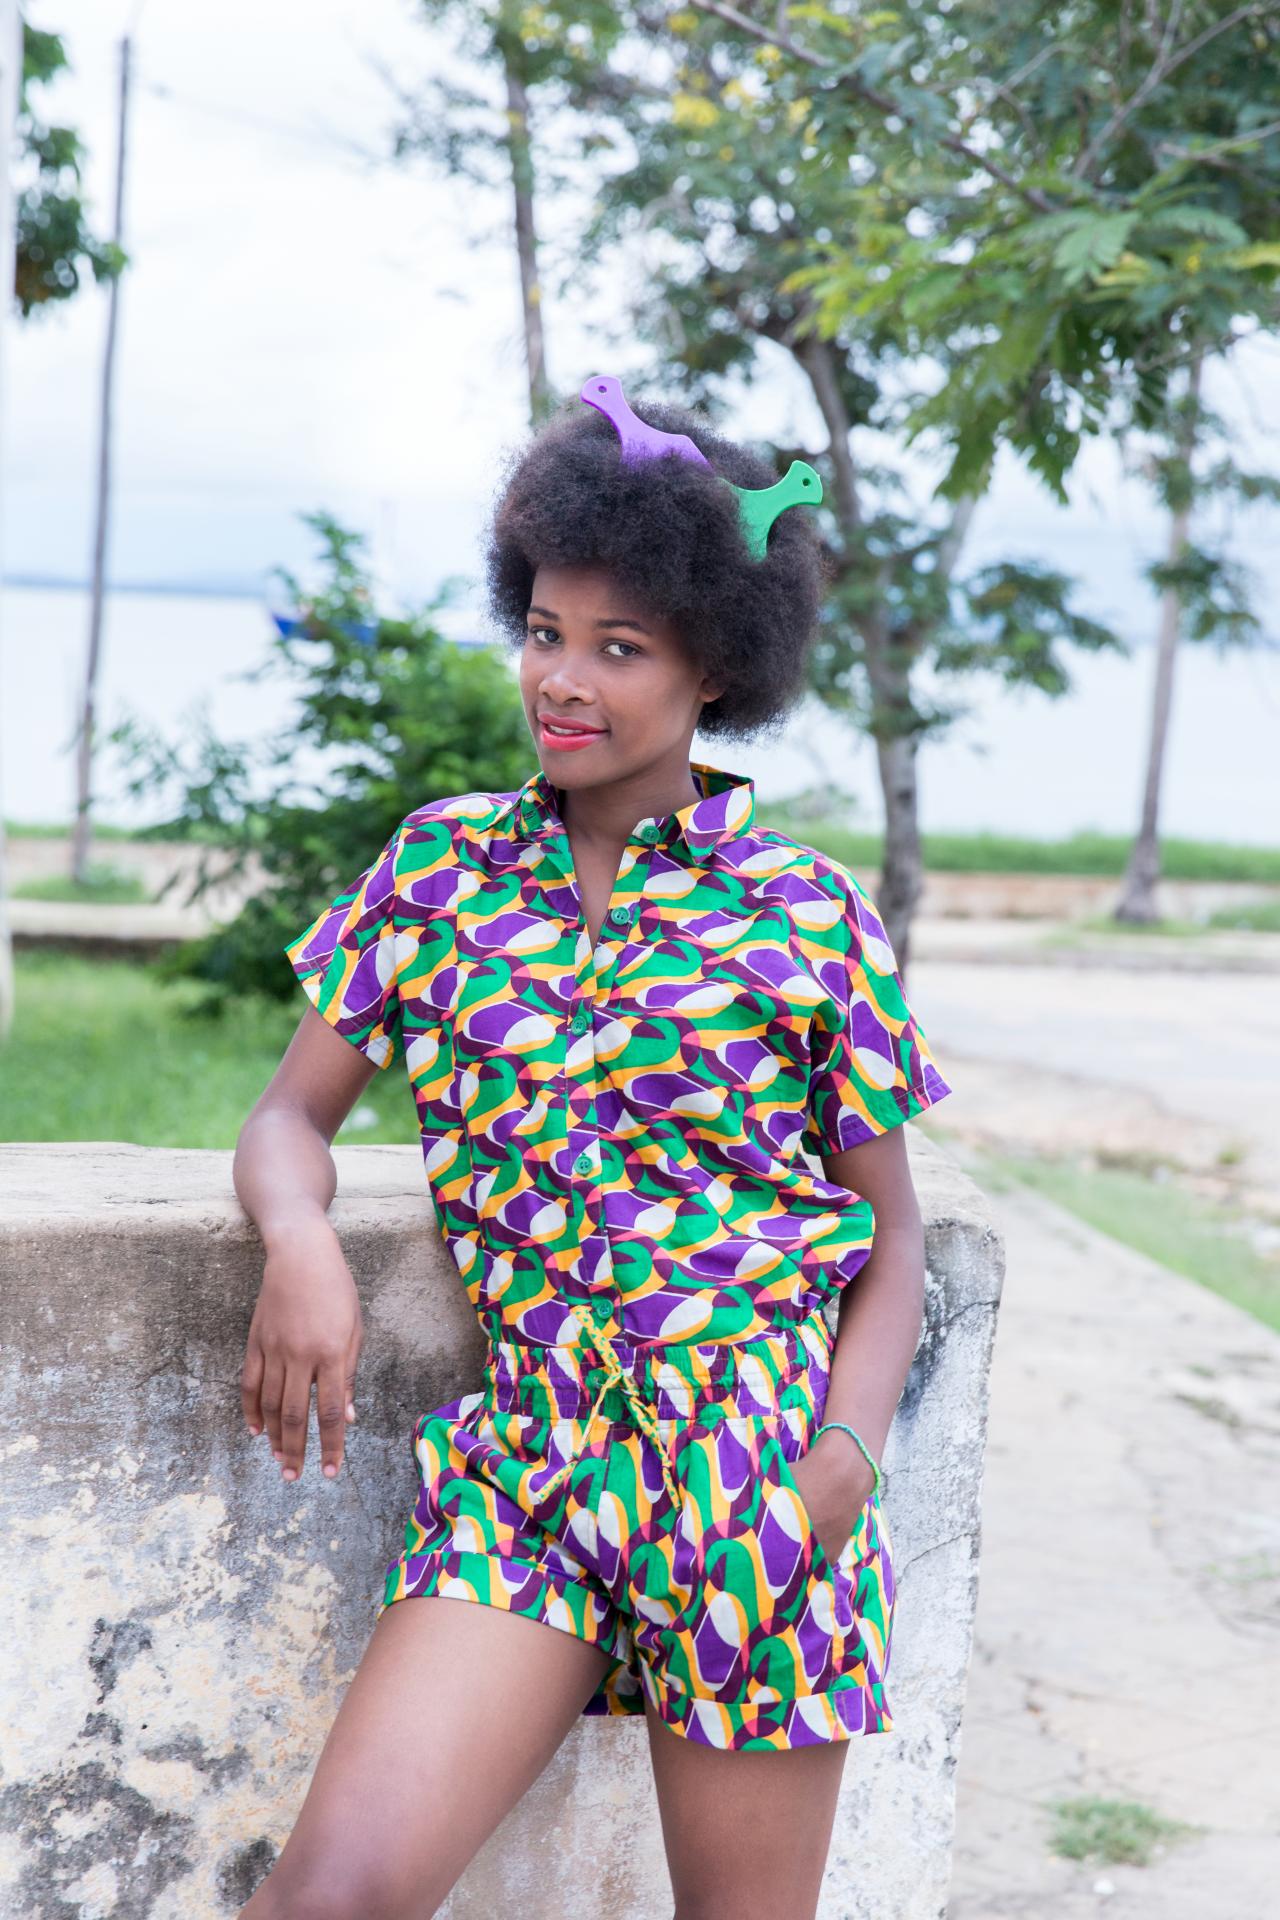 Catia, 20 studies Art and Culture in Maputo, Mozambiques capital city. She loves returning to her hometown Pemba.